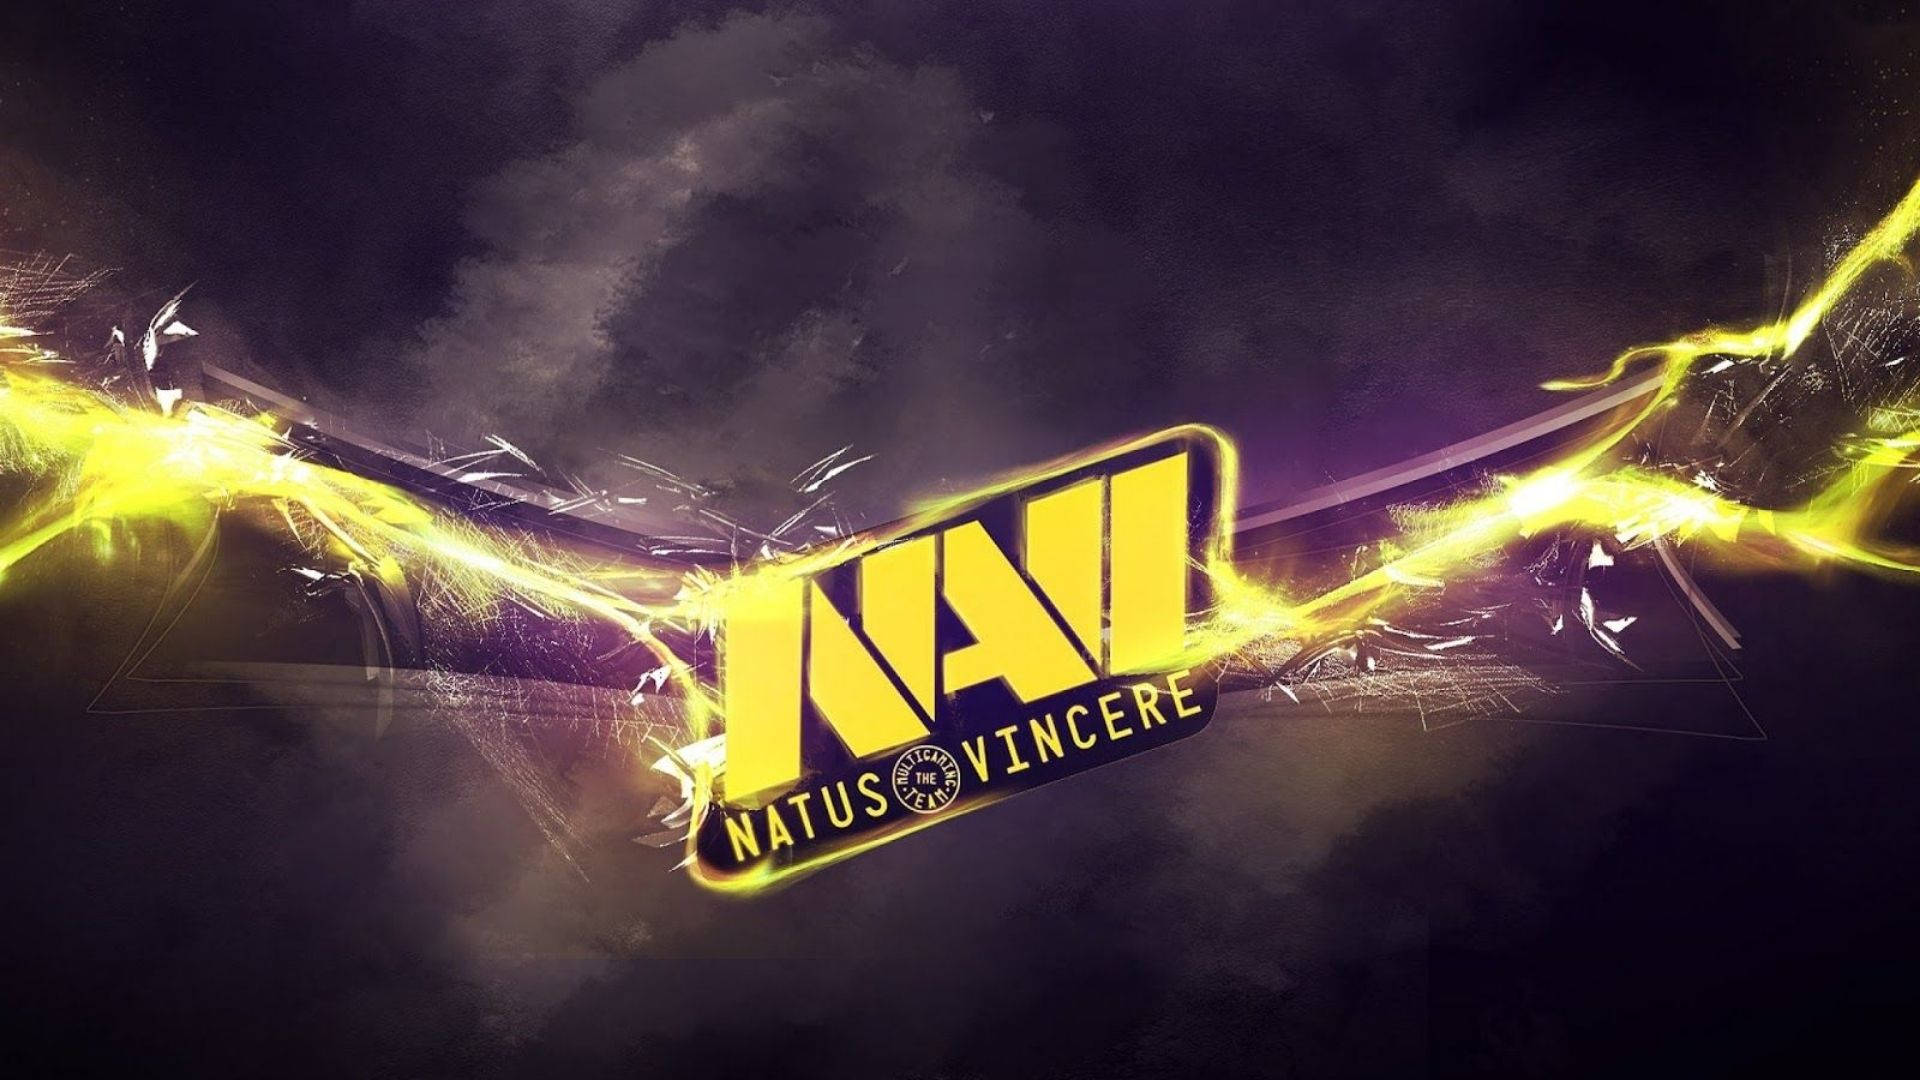 Bolted Logo Of Natus Vincere